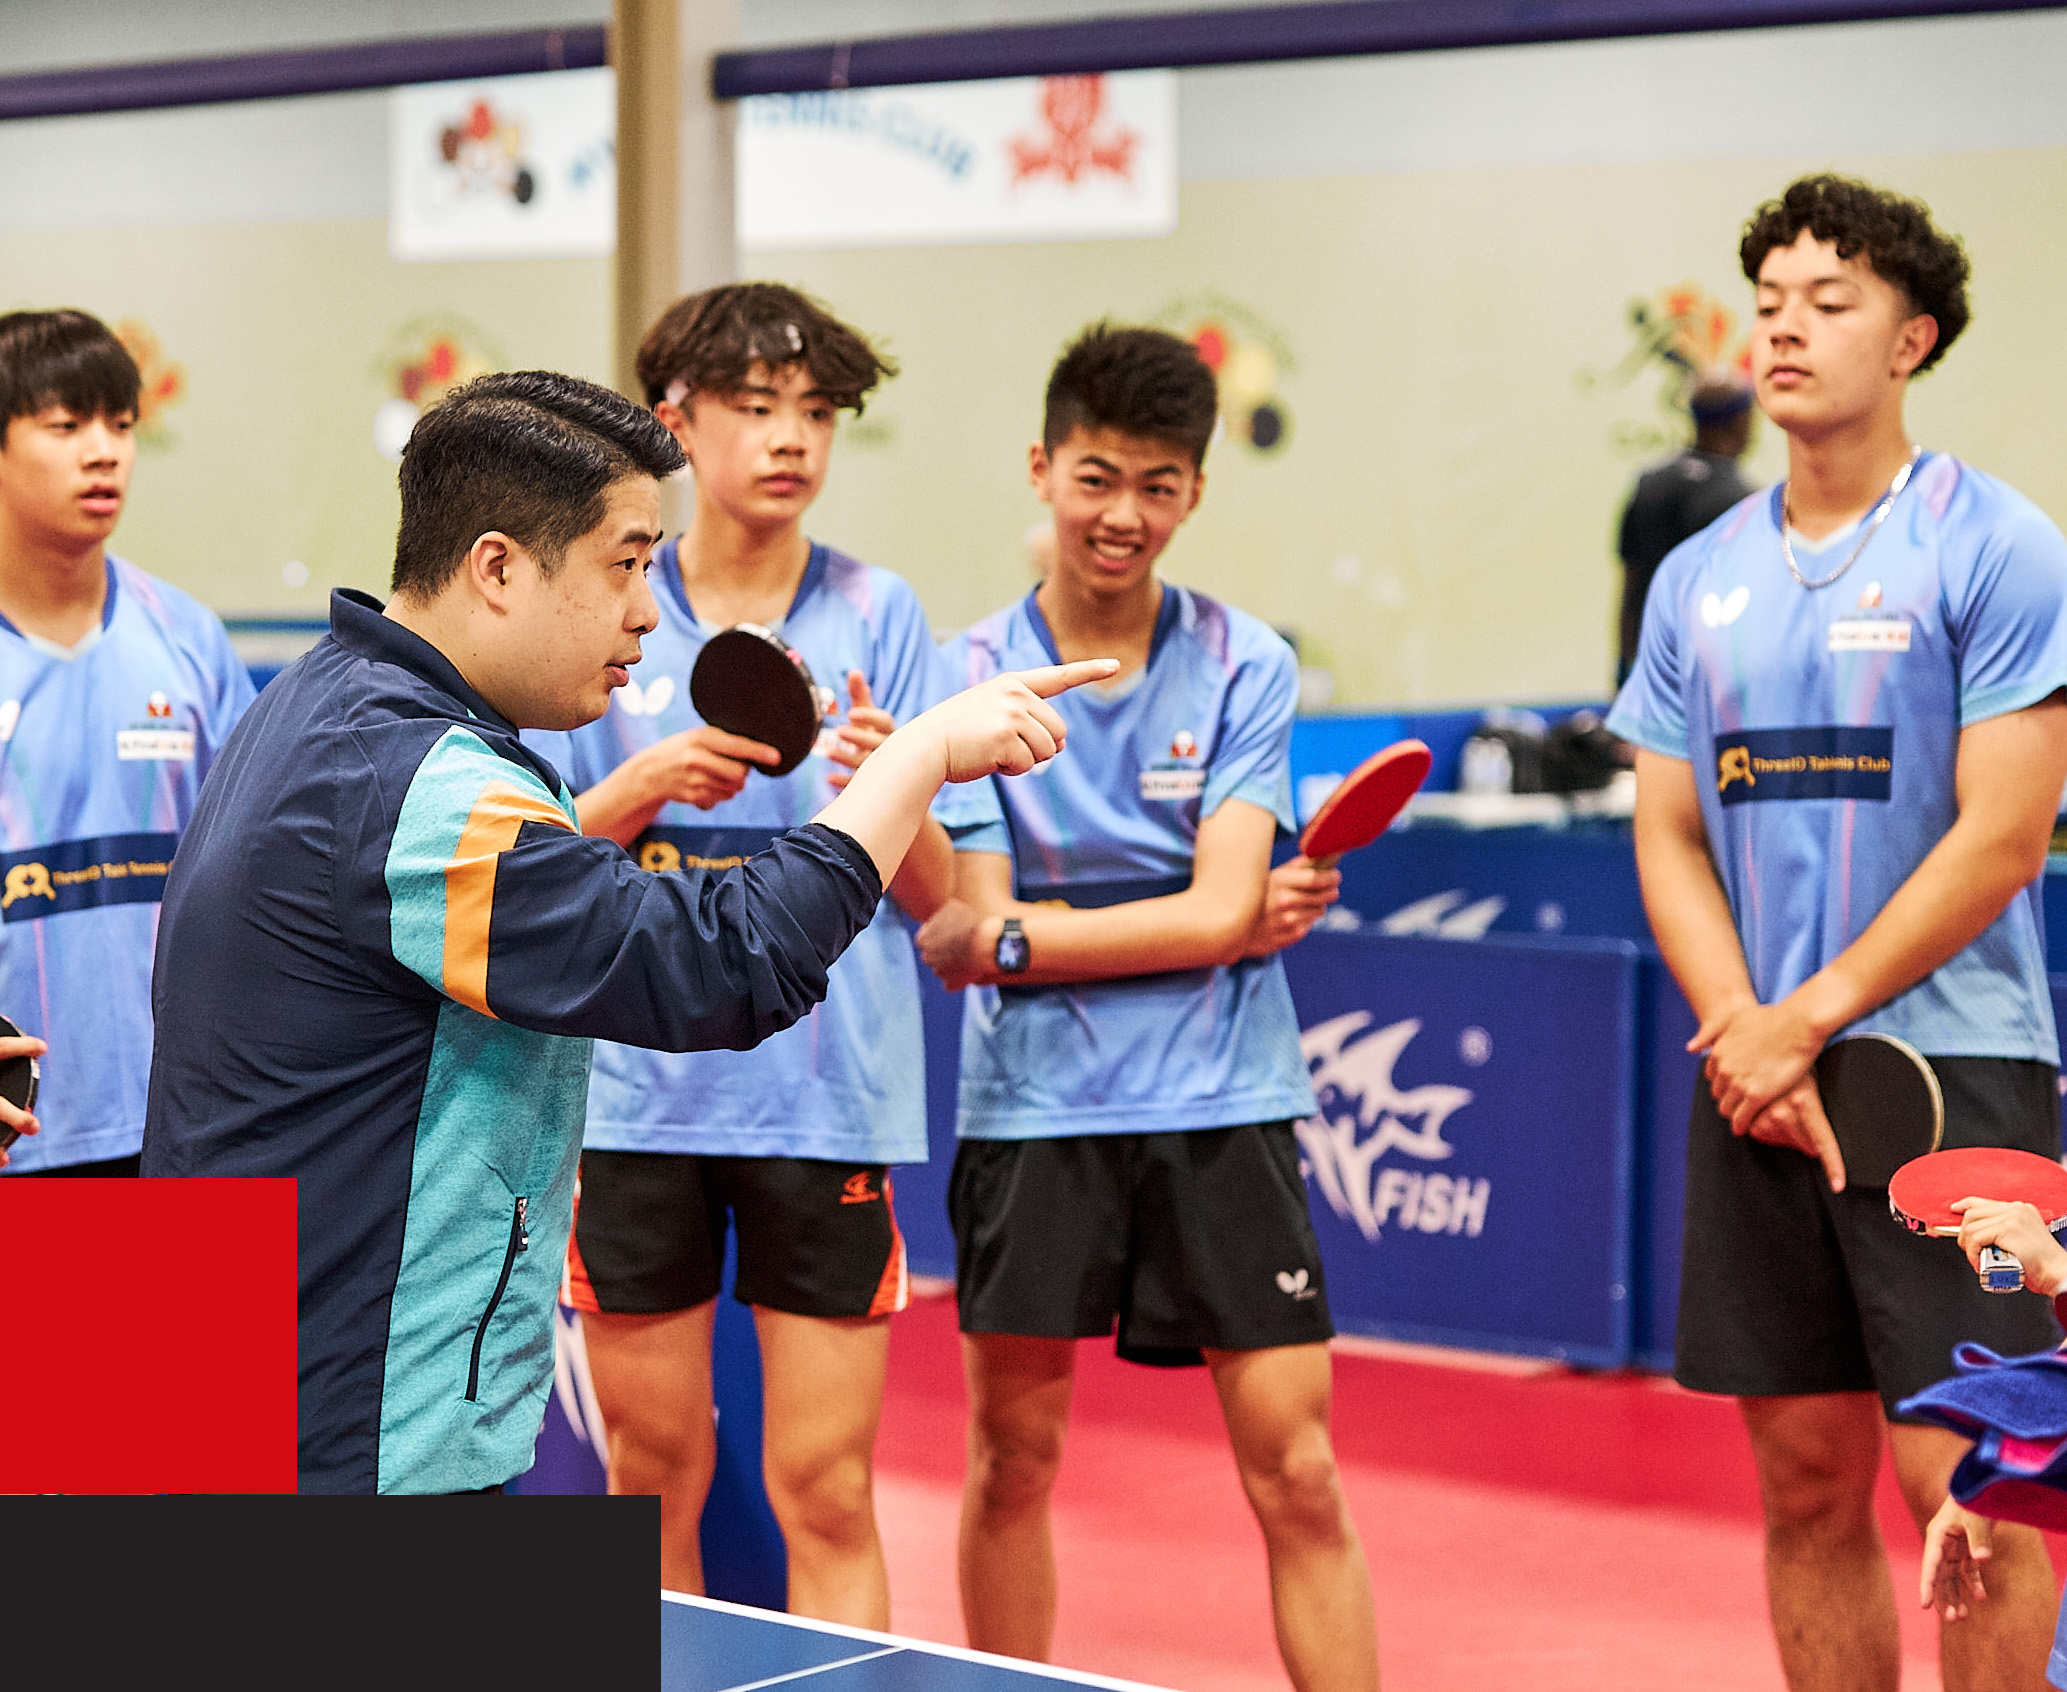 Table Tennis coach instructing team of young players.